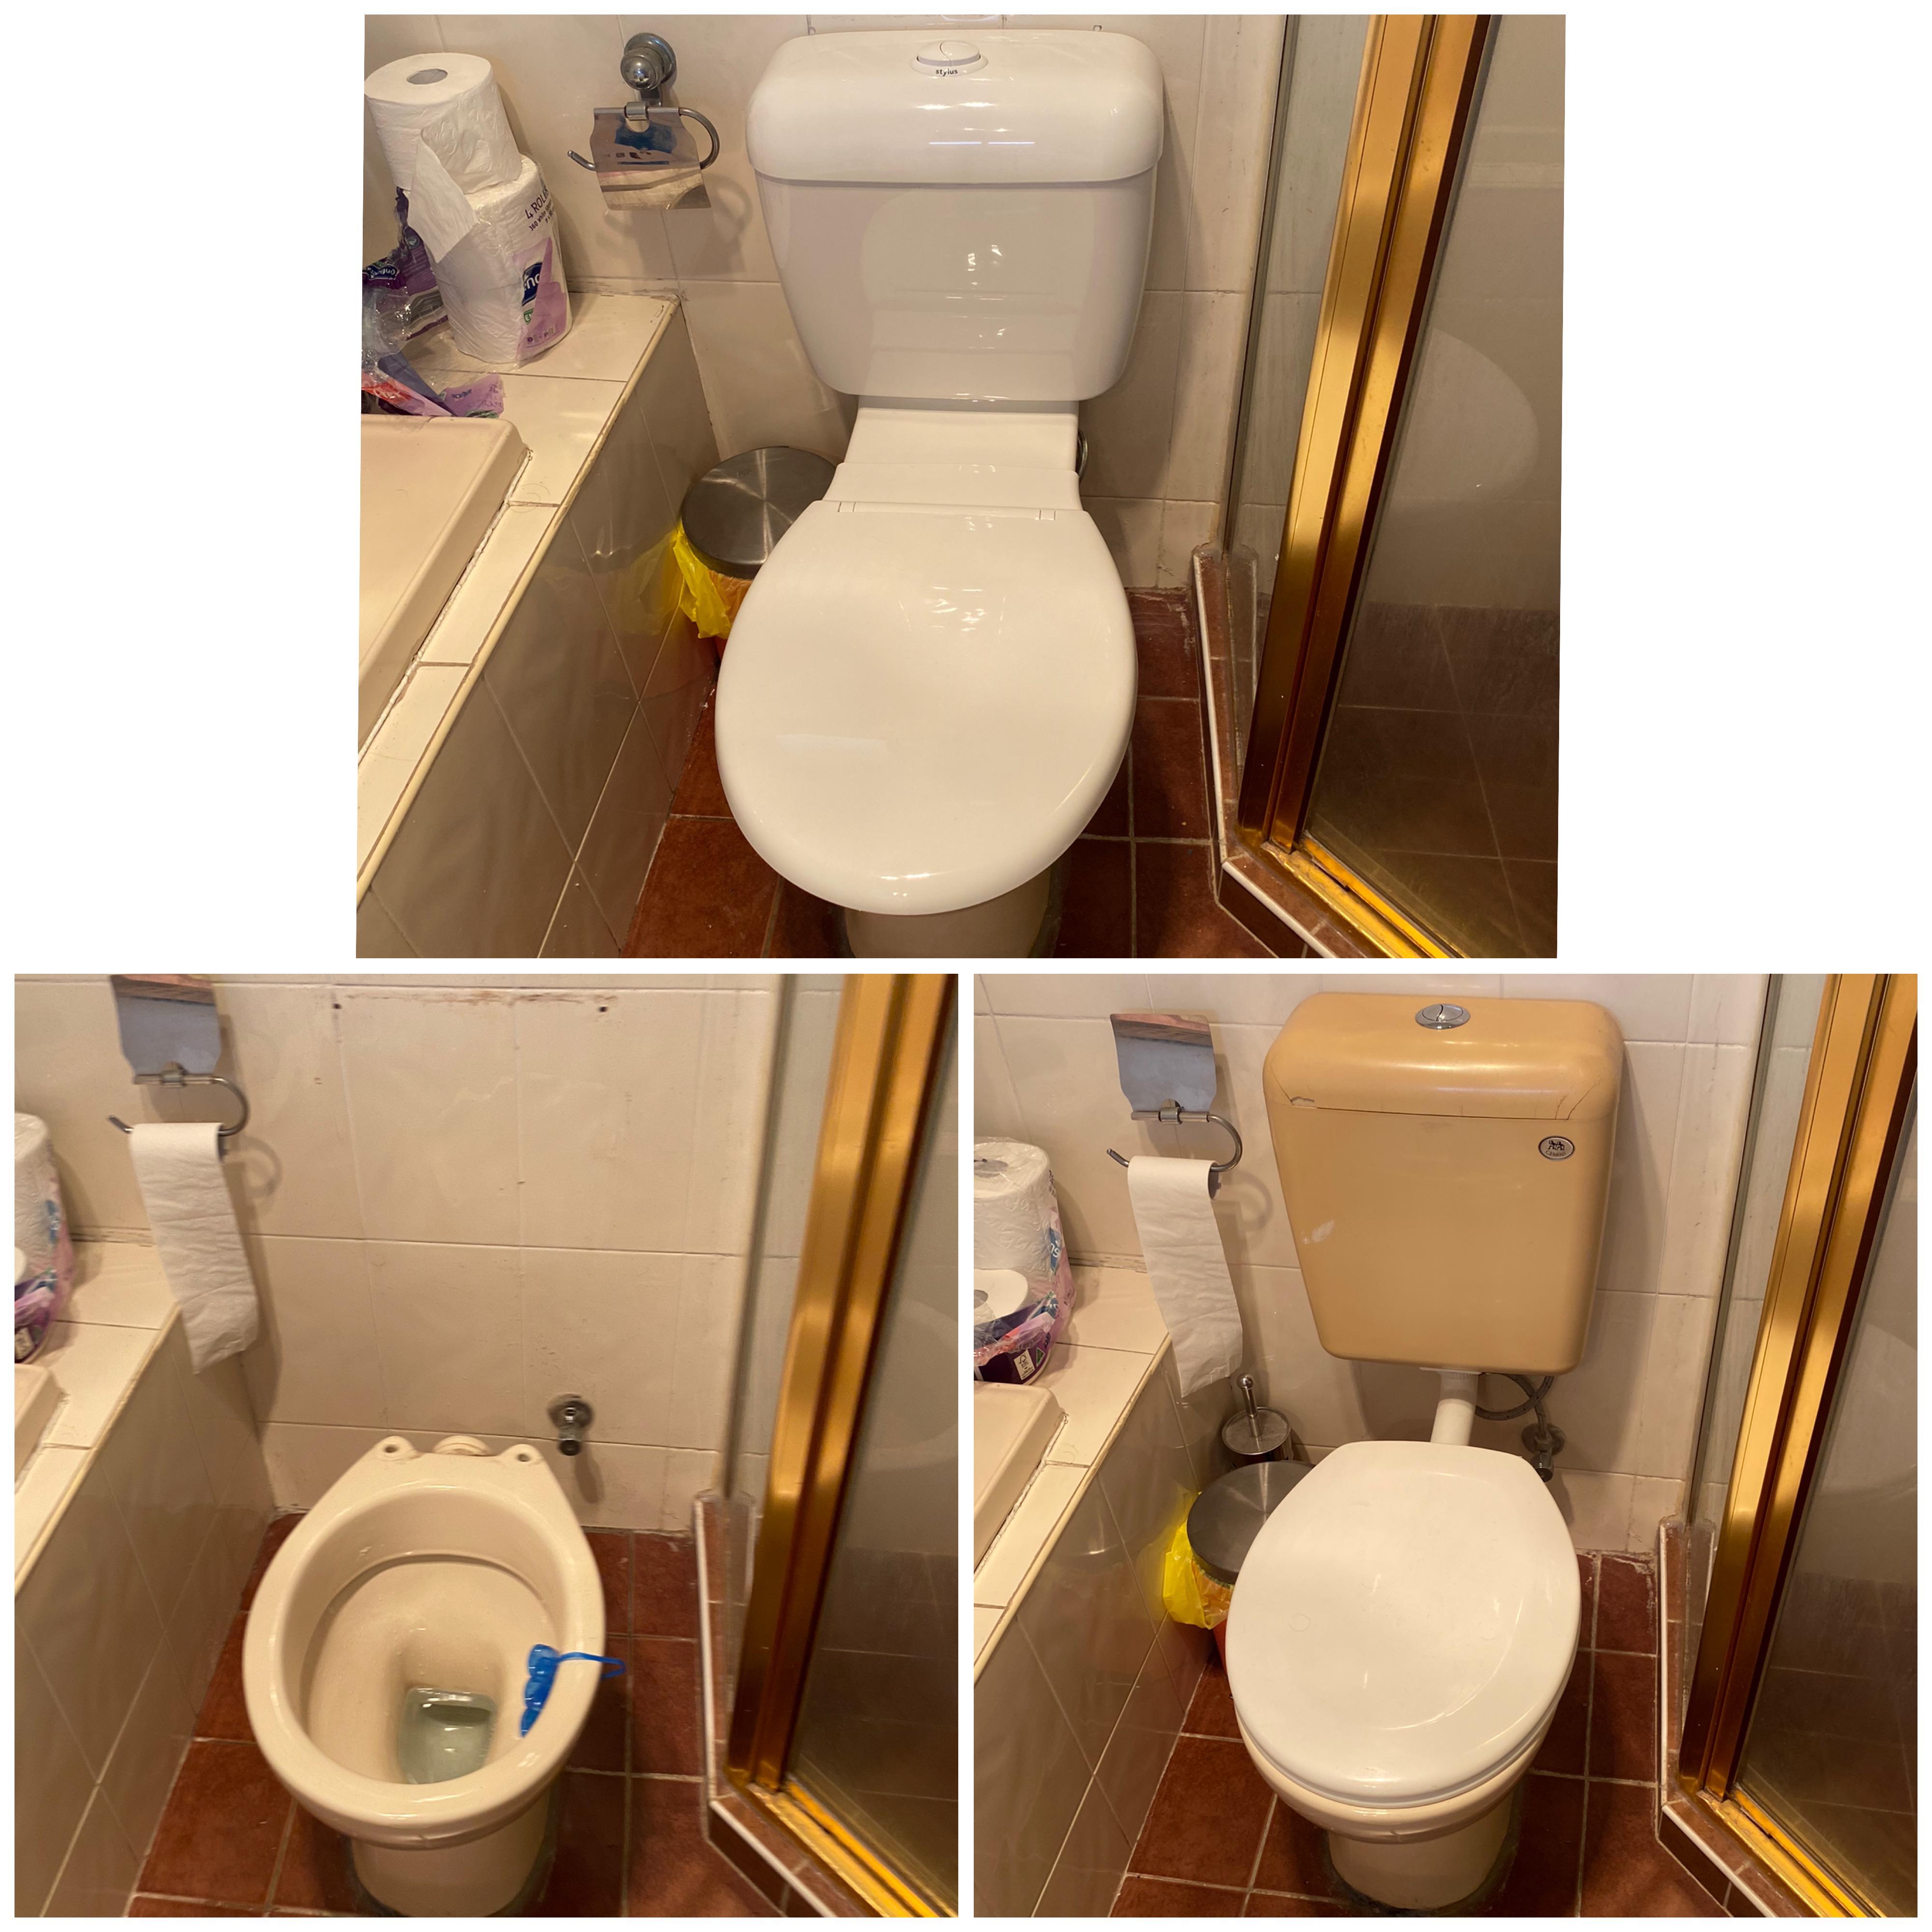 TOILET CISTERN REPLACEMENTS CRUCIAL Plumbing Services Pty Ltd Seven Hills (02) 8041 4999